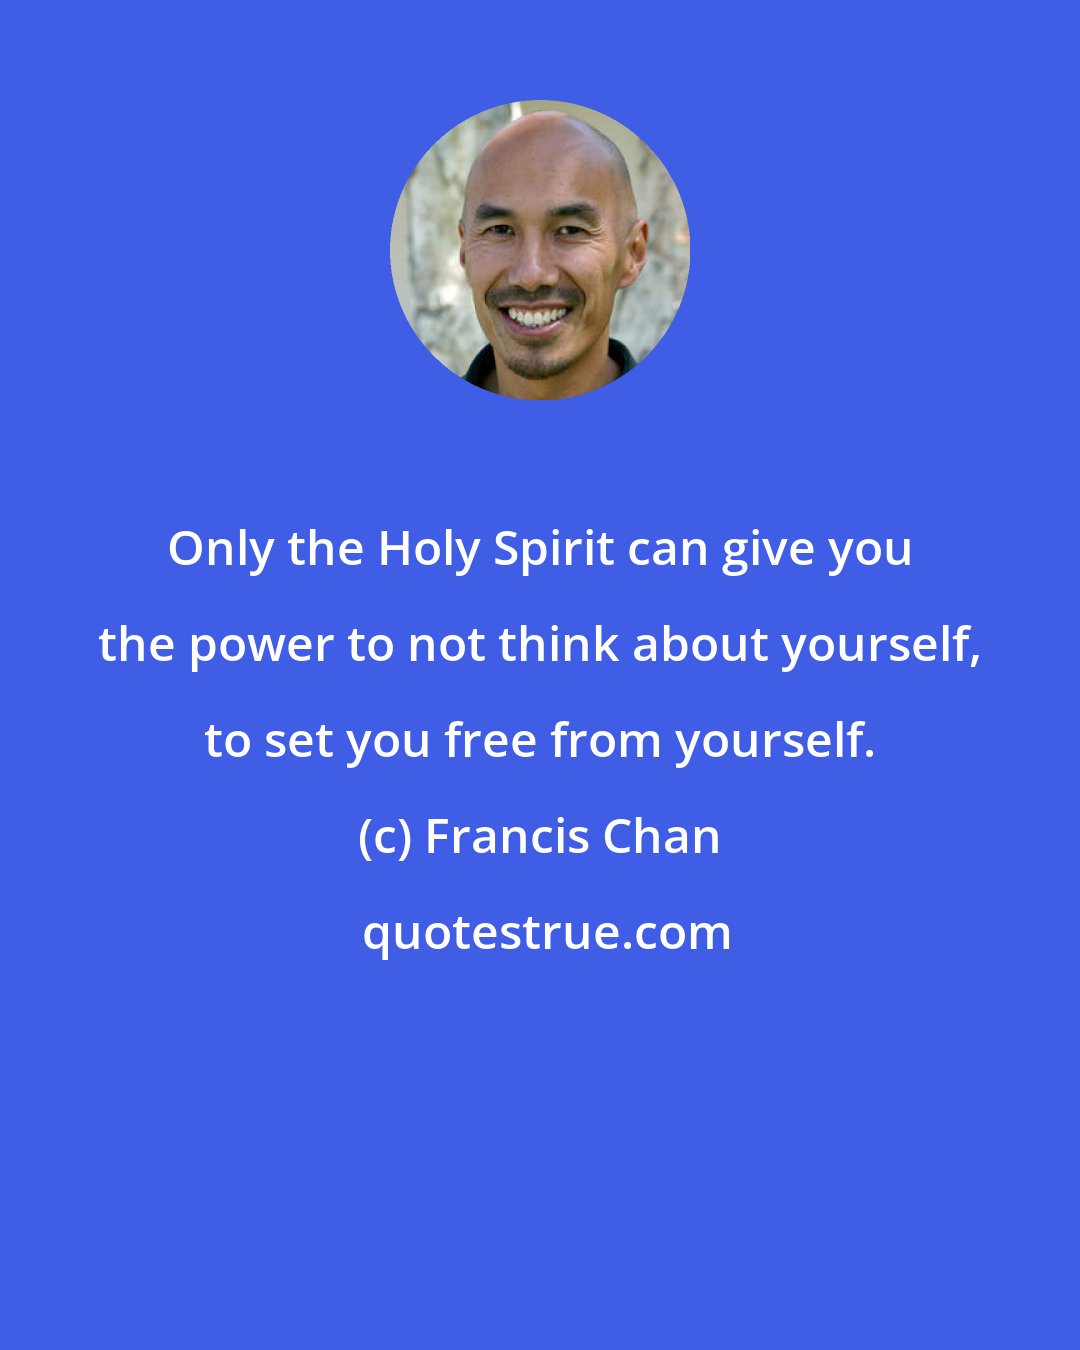 Francis Chan: Only the Holy Spirit can give you the power to not think about yourself, to set you free from yourself.